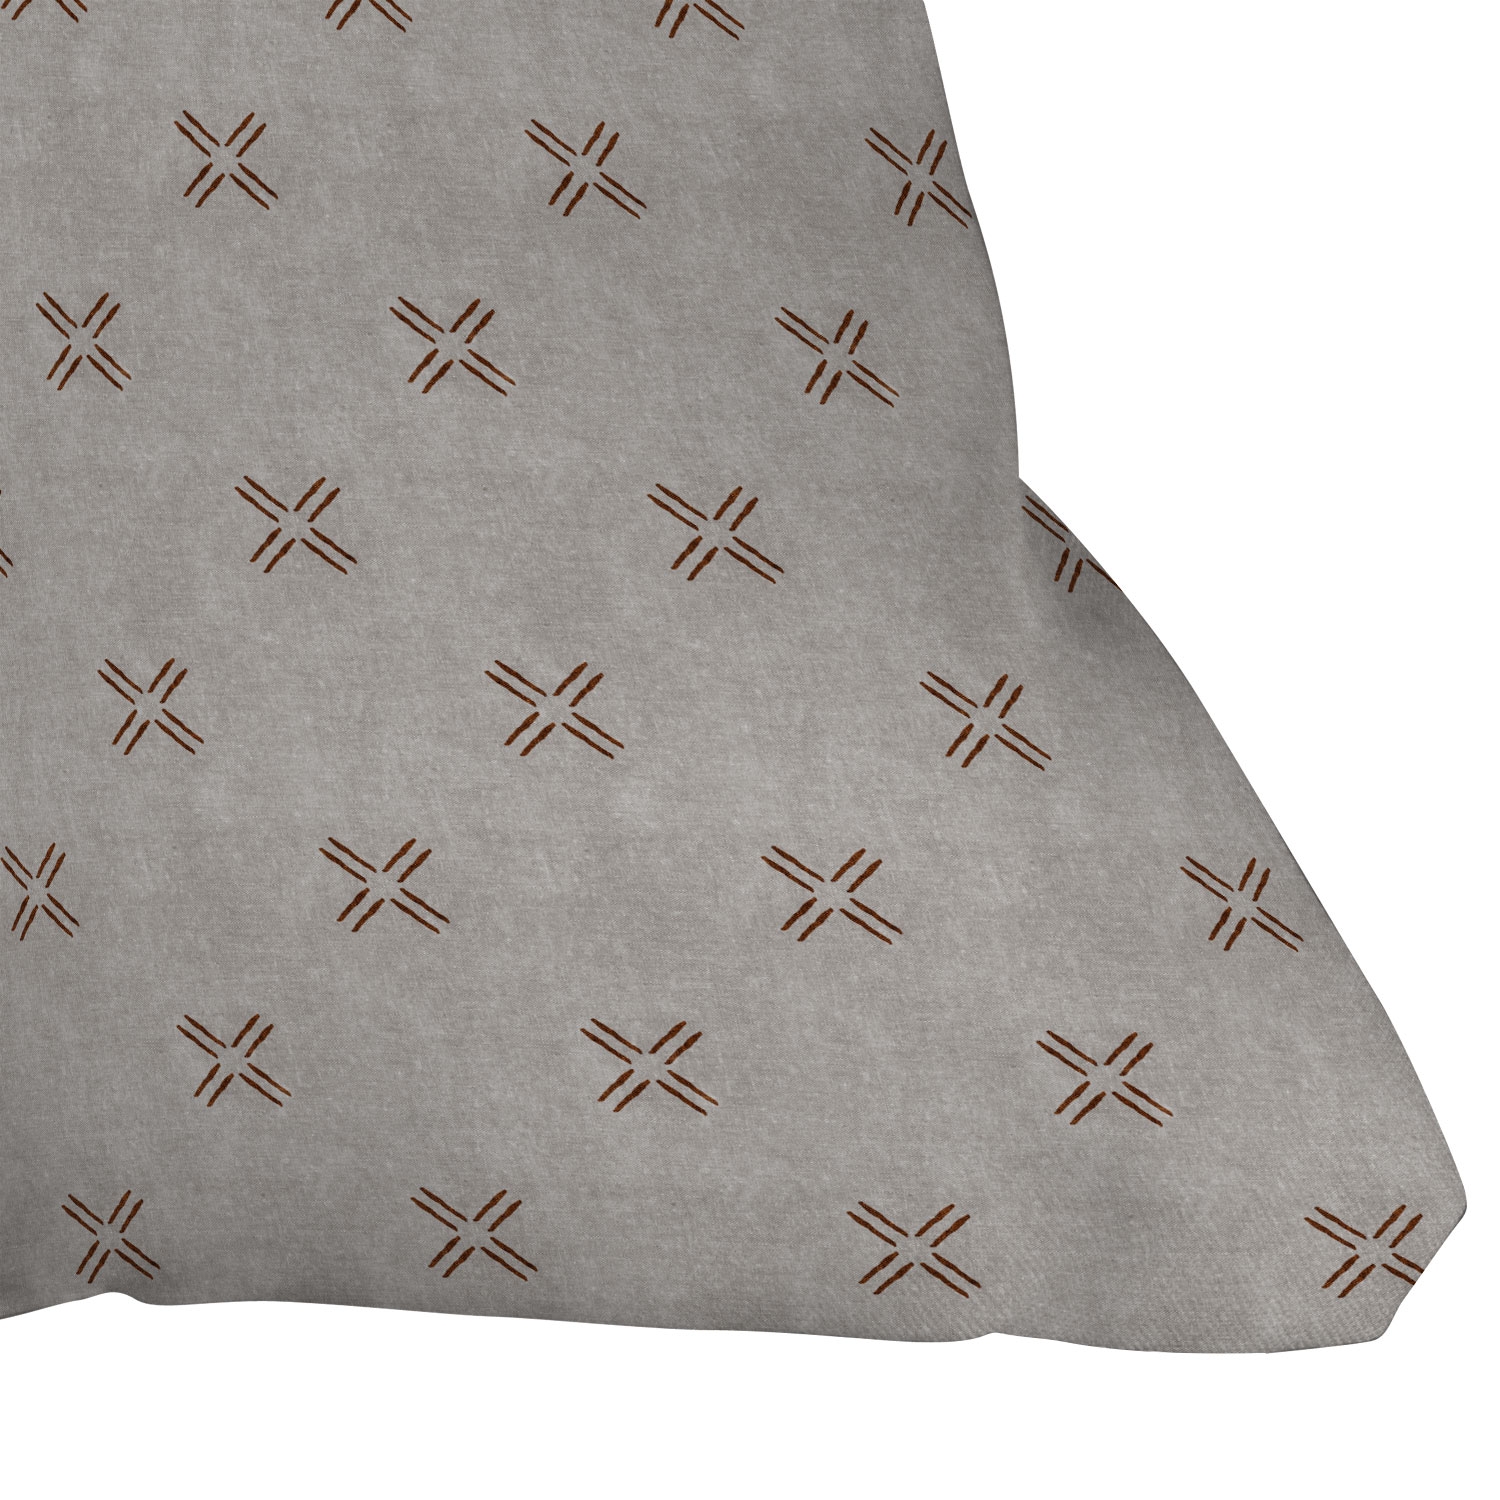 Mud Cloth Cross Stone Rust by Little Arrow Design Co - Outdoor Throw Pillow 26" x 26" - Image 2